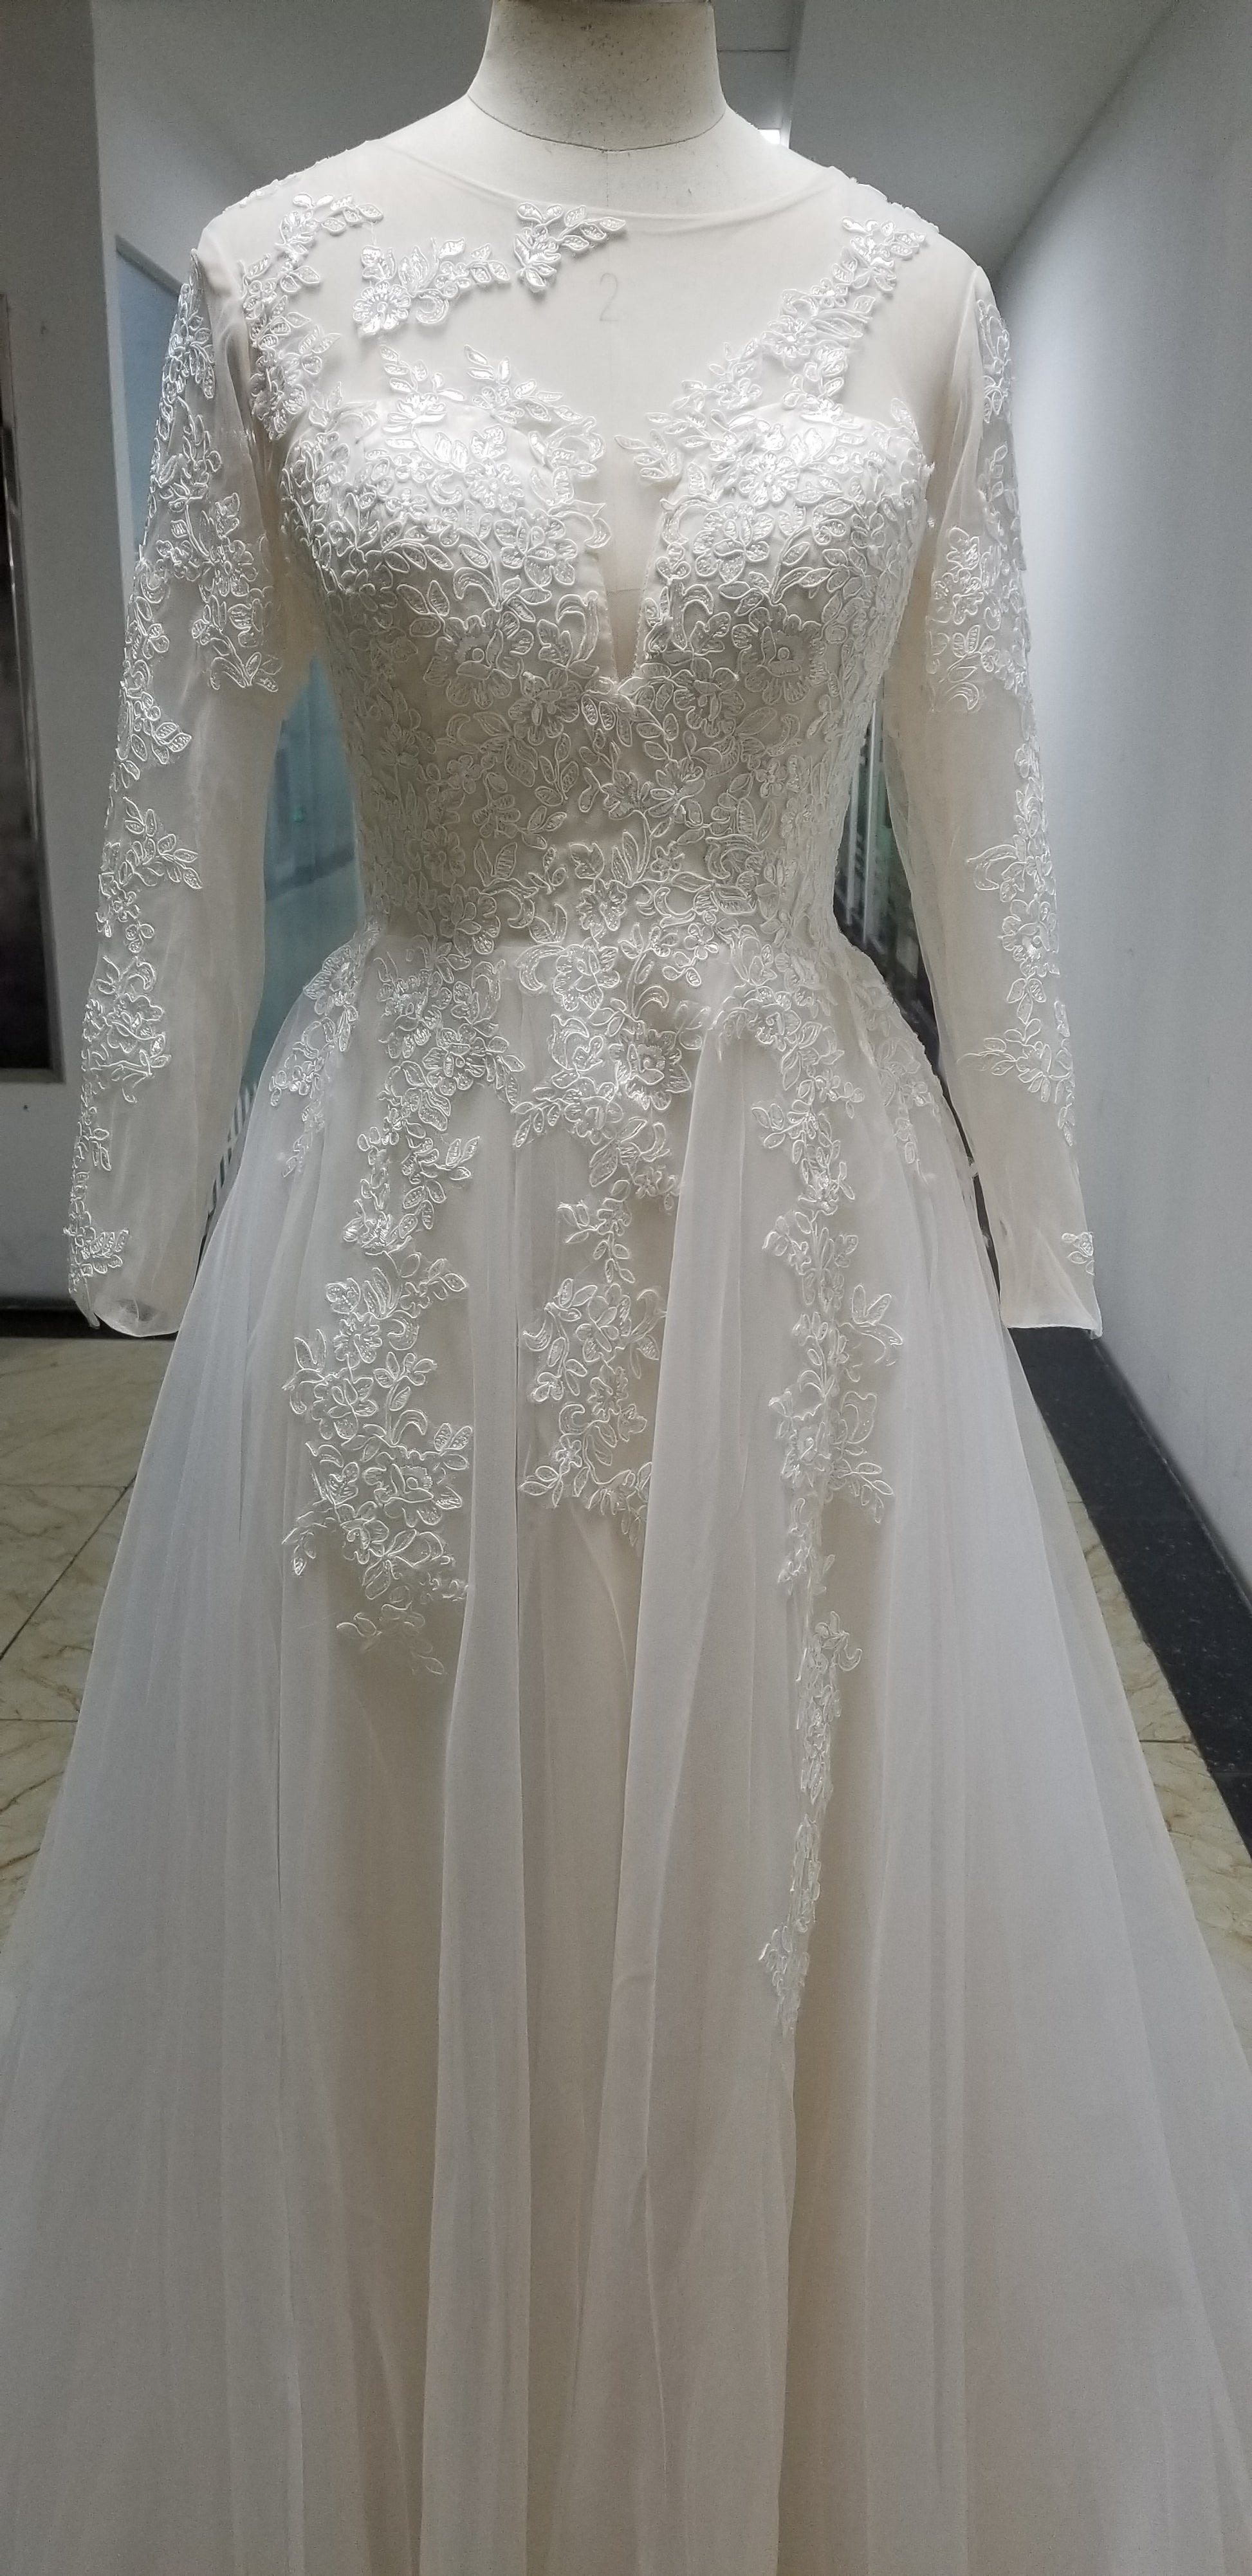 Long Sleeves Tulle A Line Lace Appliques Bridal Wedding Gowns Lace Up Vestido De Noiva Back Button Floor Length Wedding Dress The Clothing Company Sydney